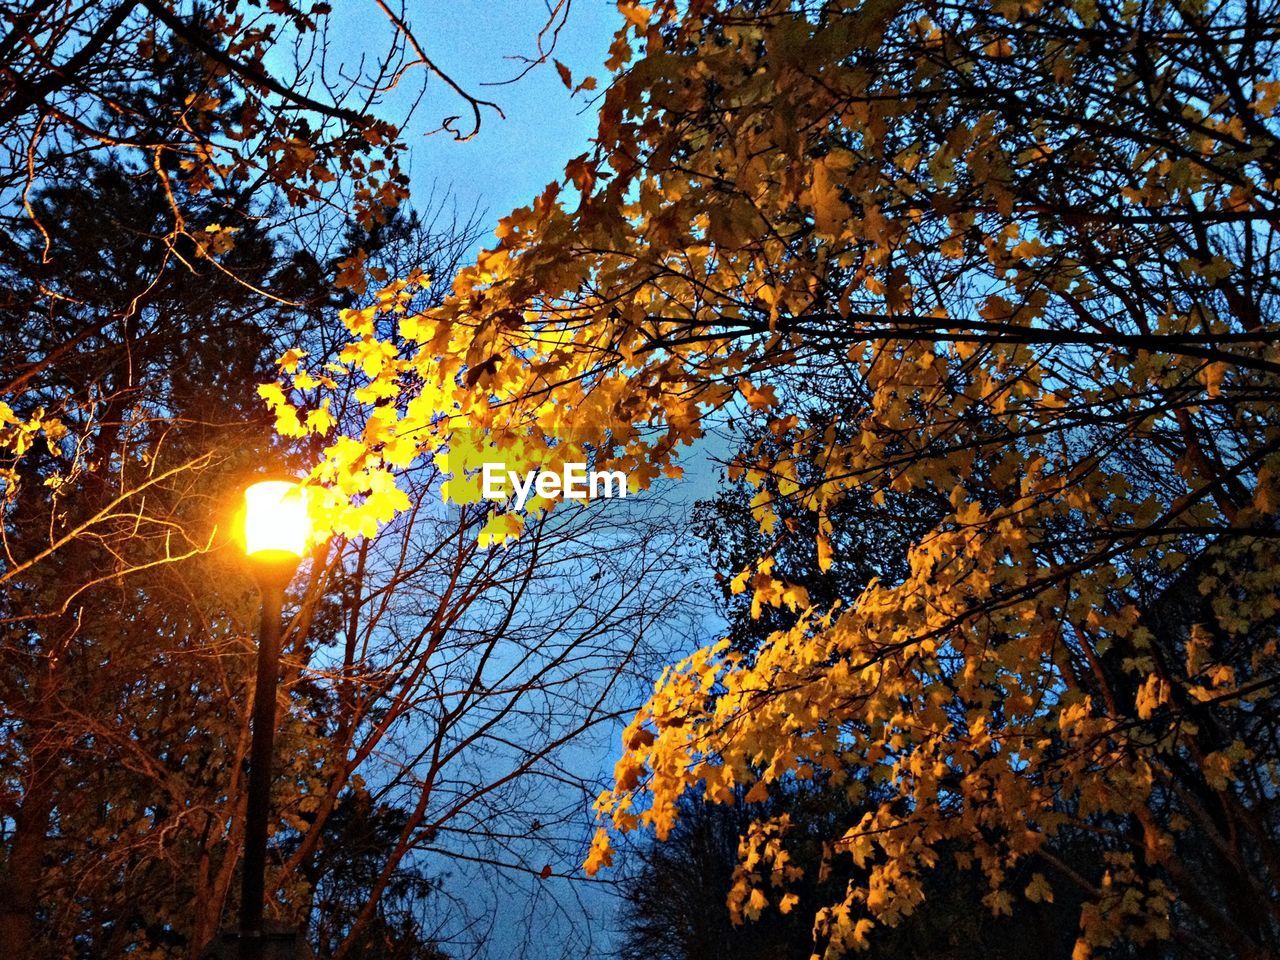 Low angle view of trees and illuminated street light at dusk